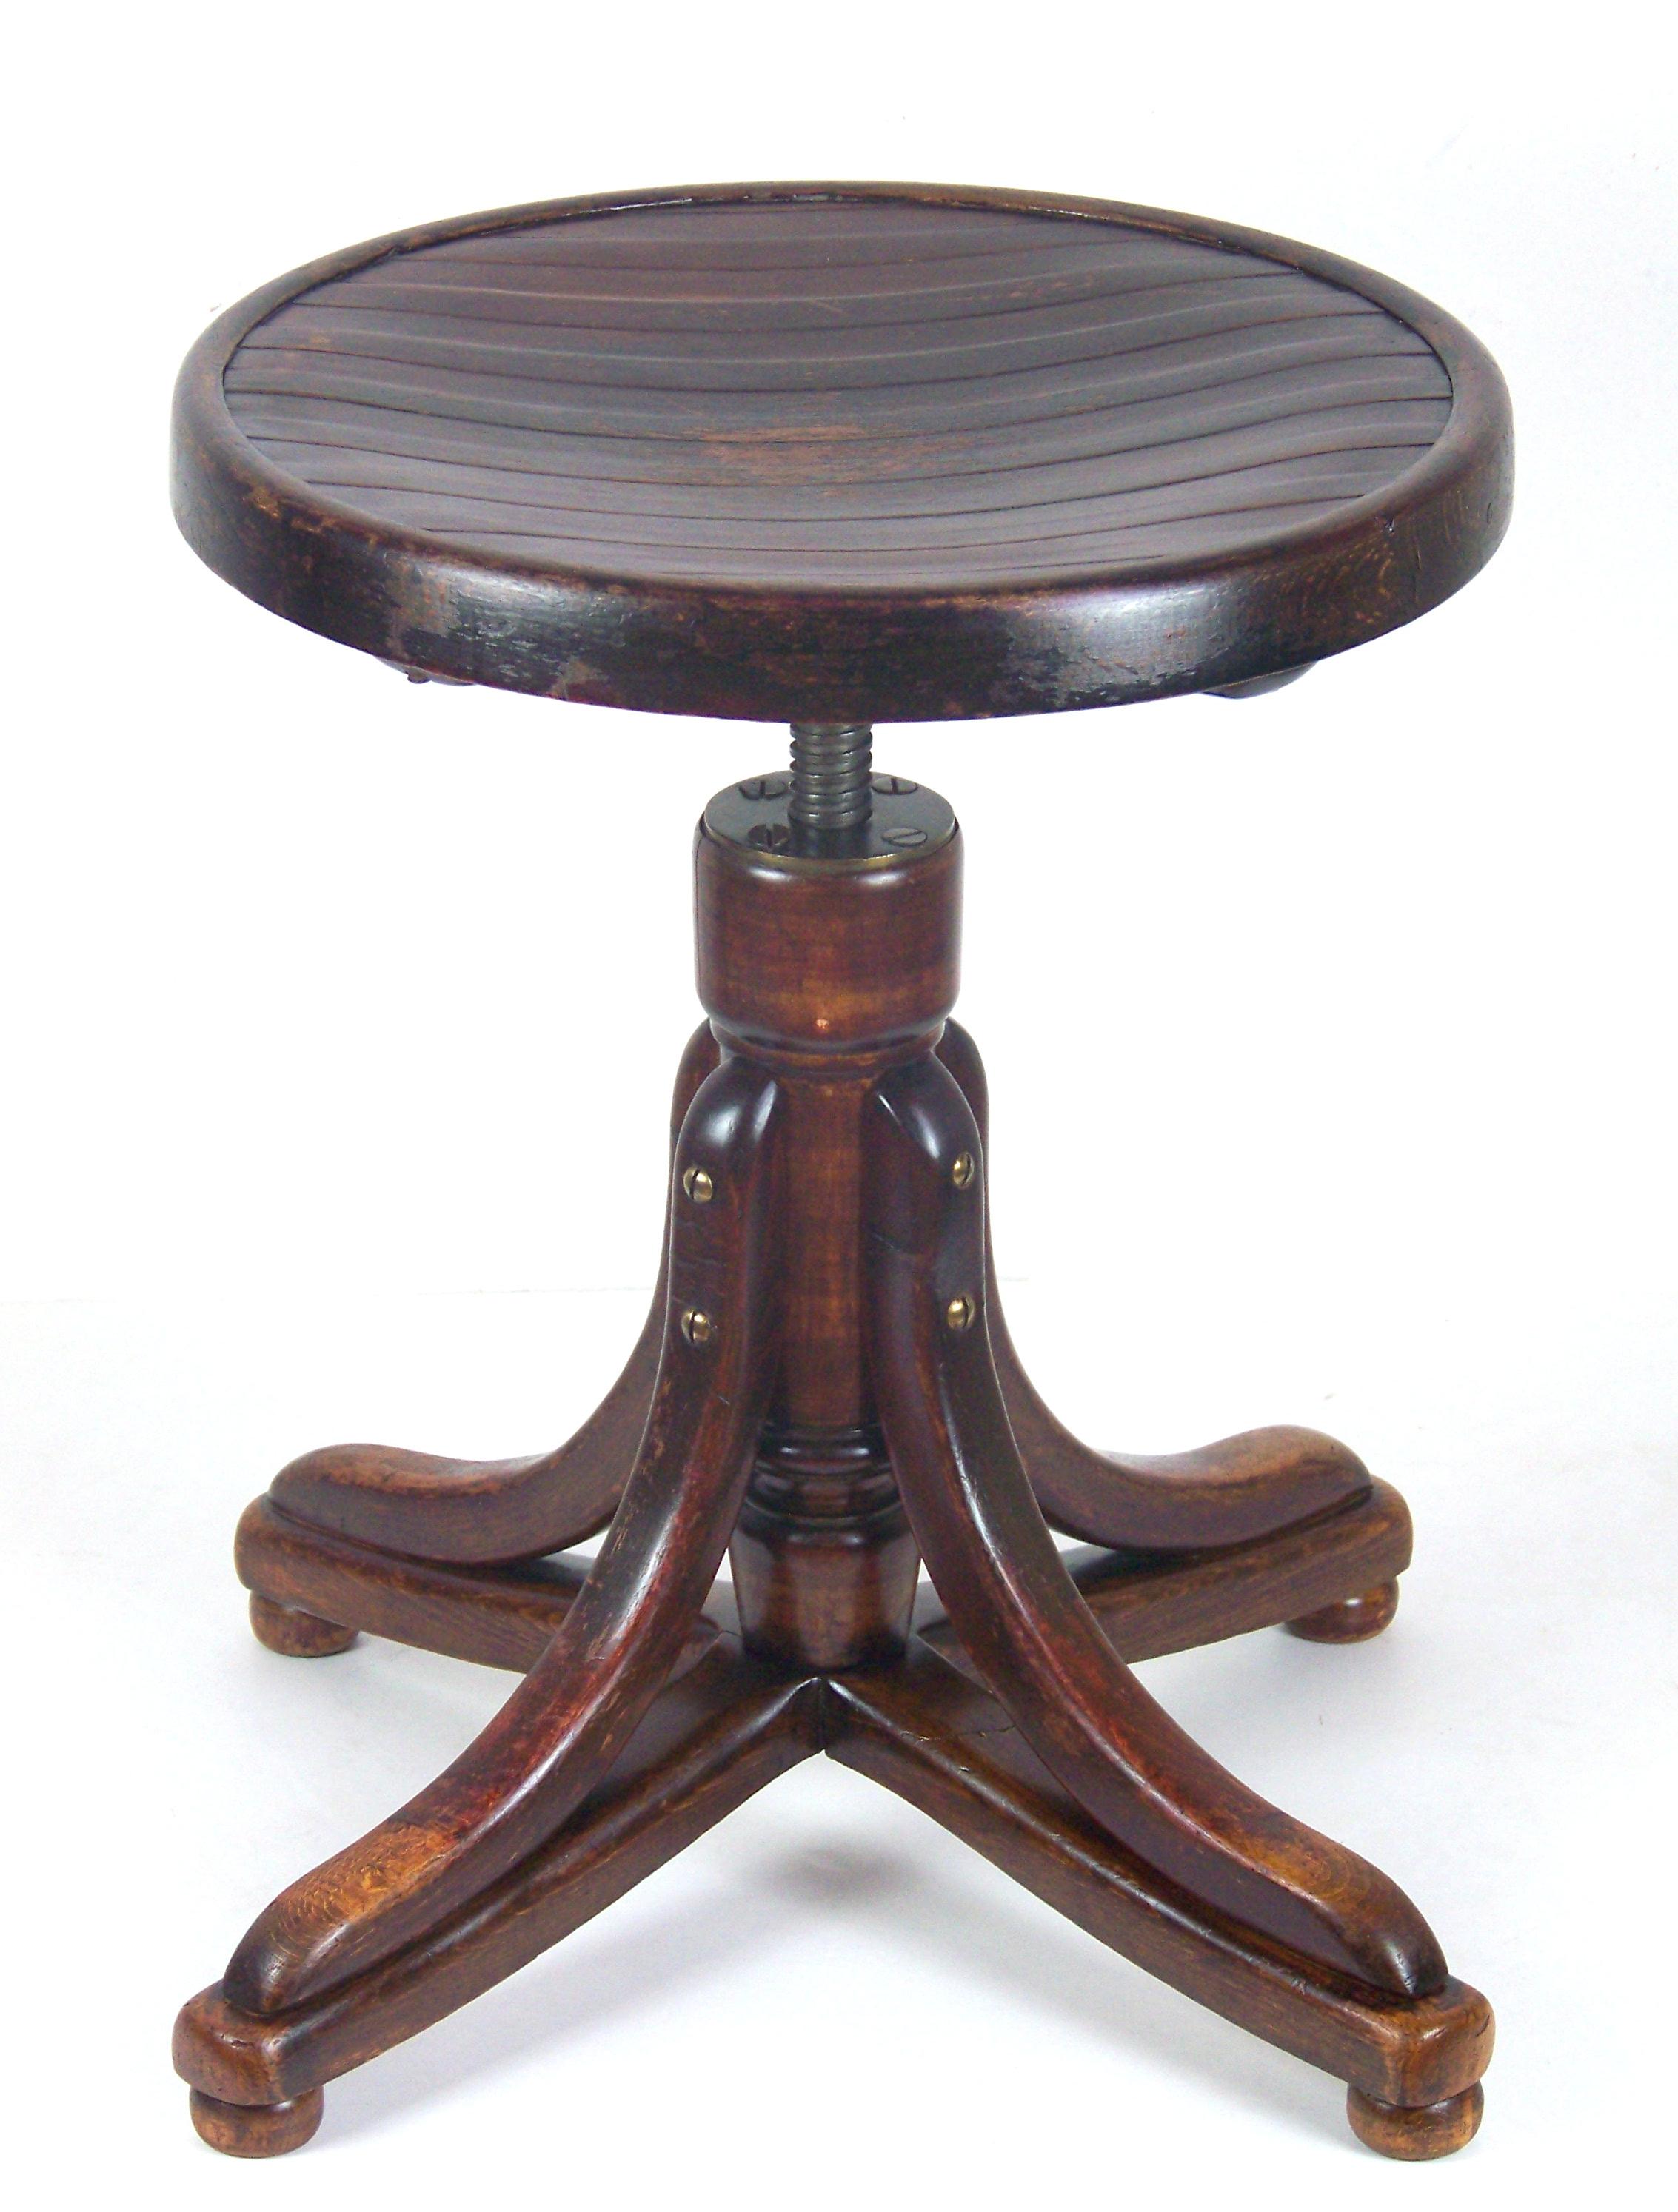 Piano stool Thonet, circa 1920. Can this item be disassembled to fit into a small package and shipped.